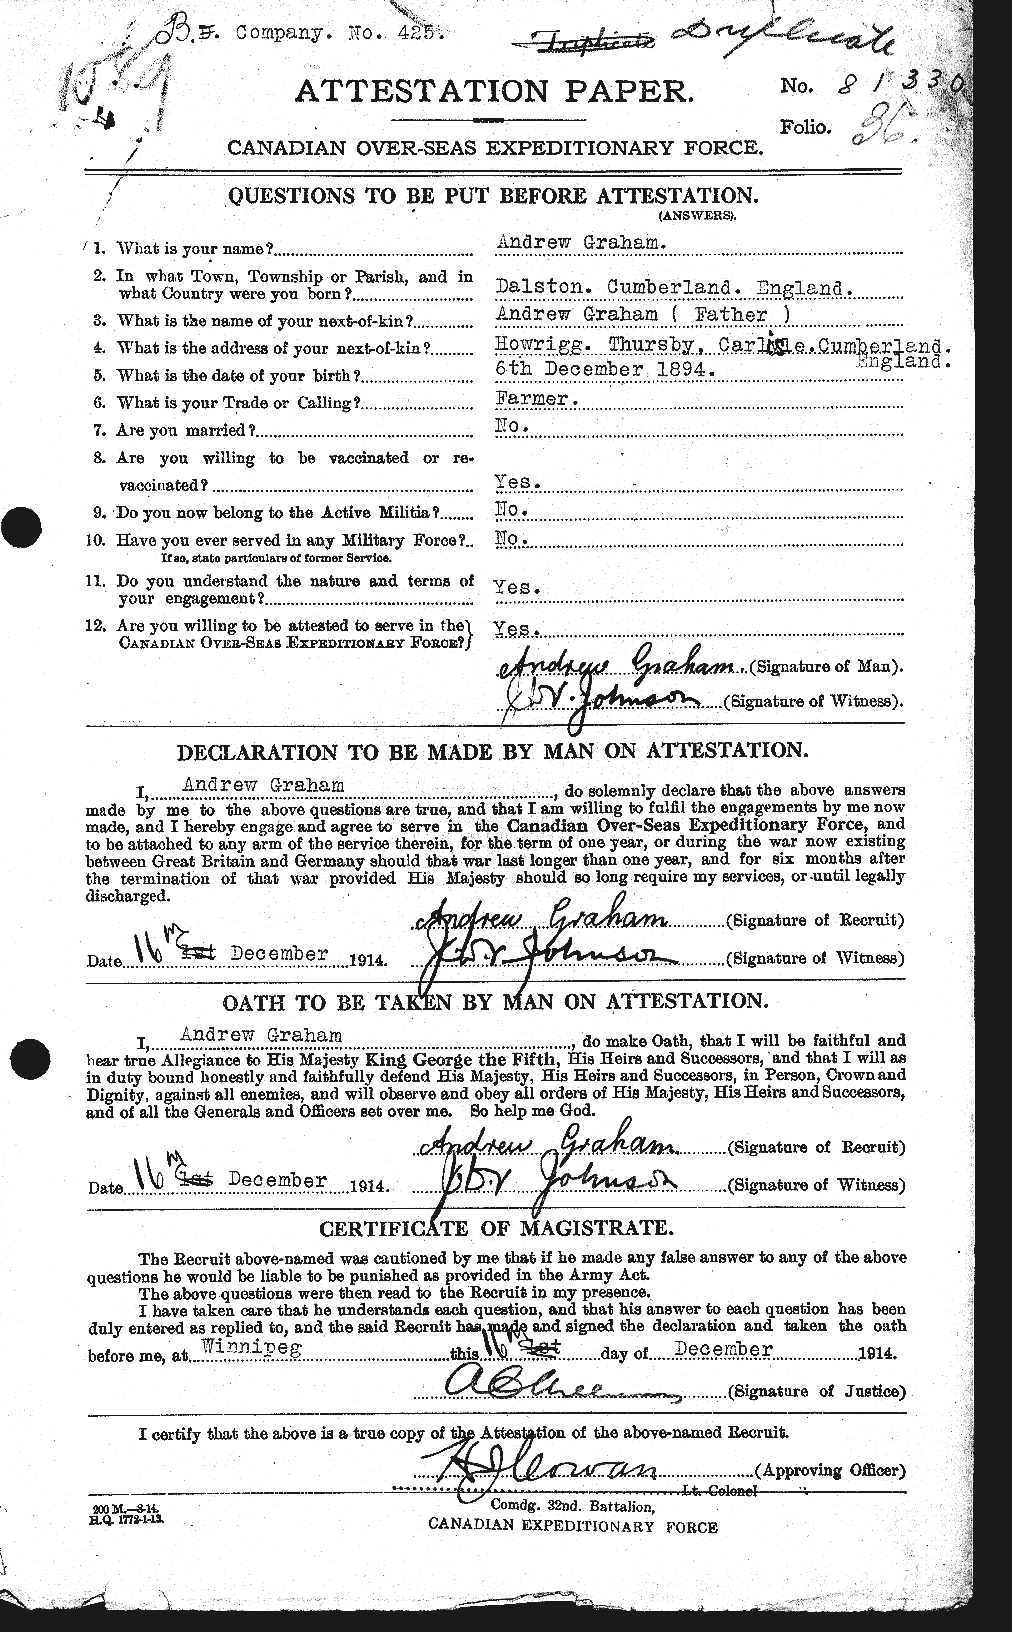 Personnel Records of the First World War - CEF 359611a